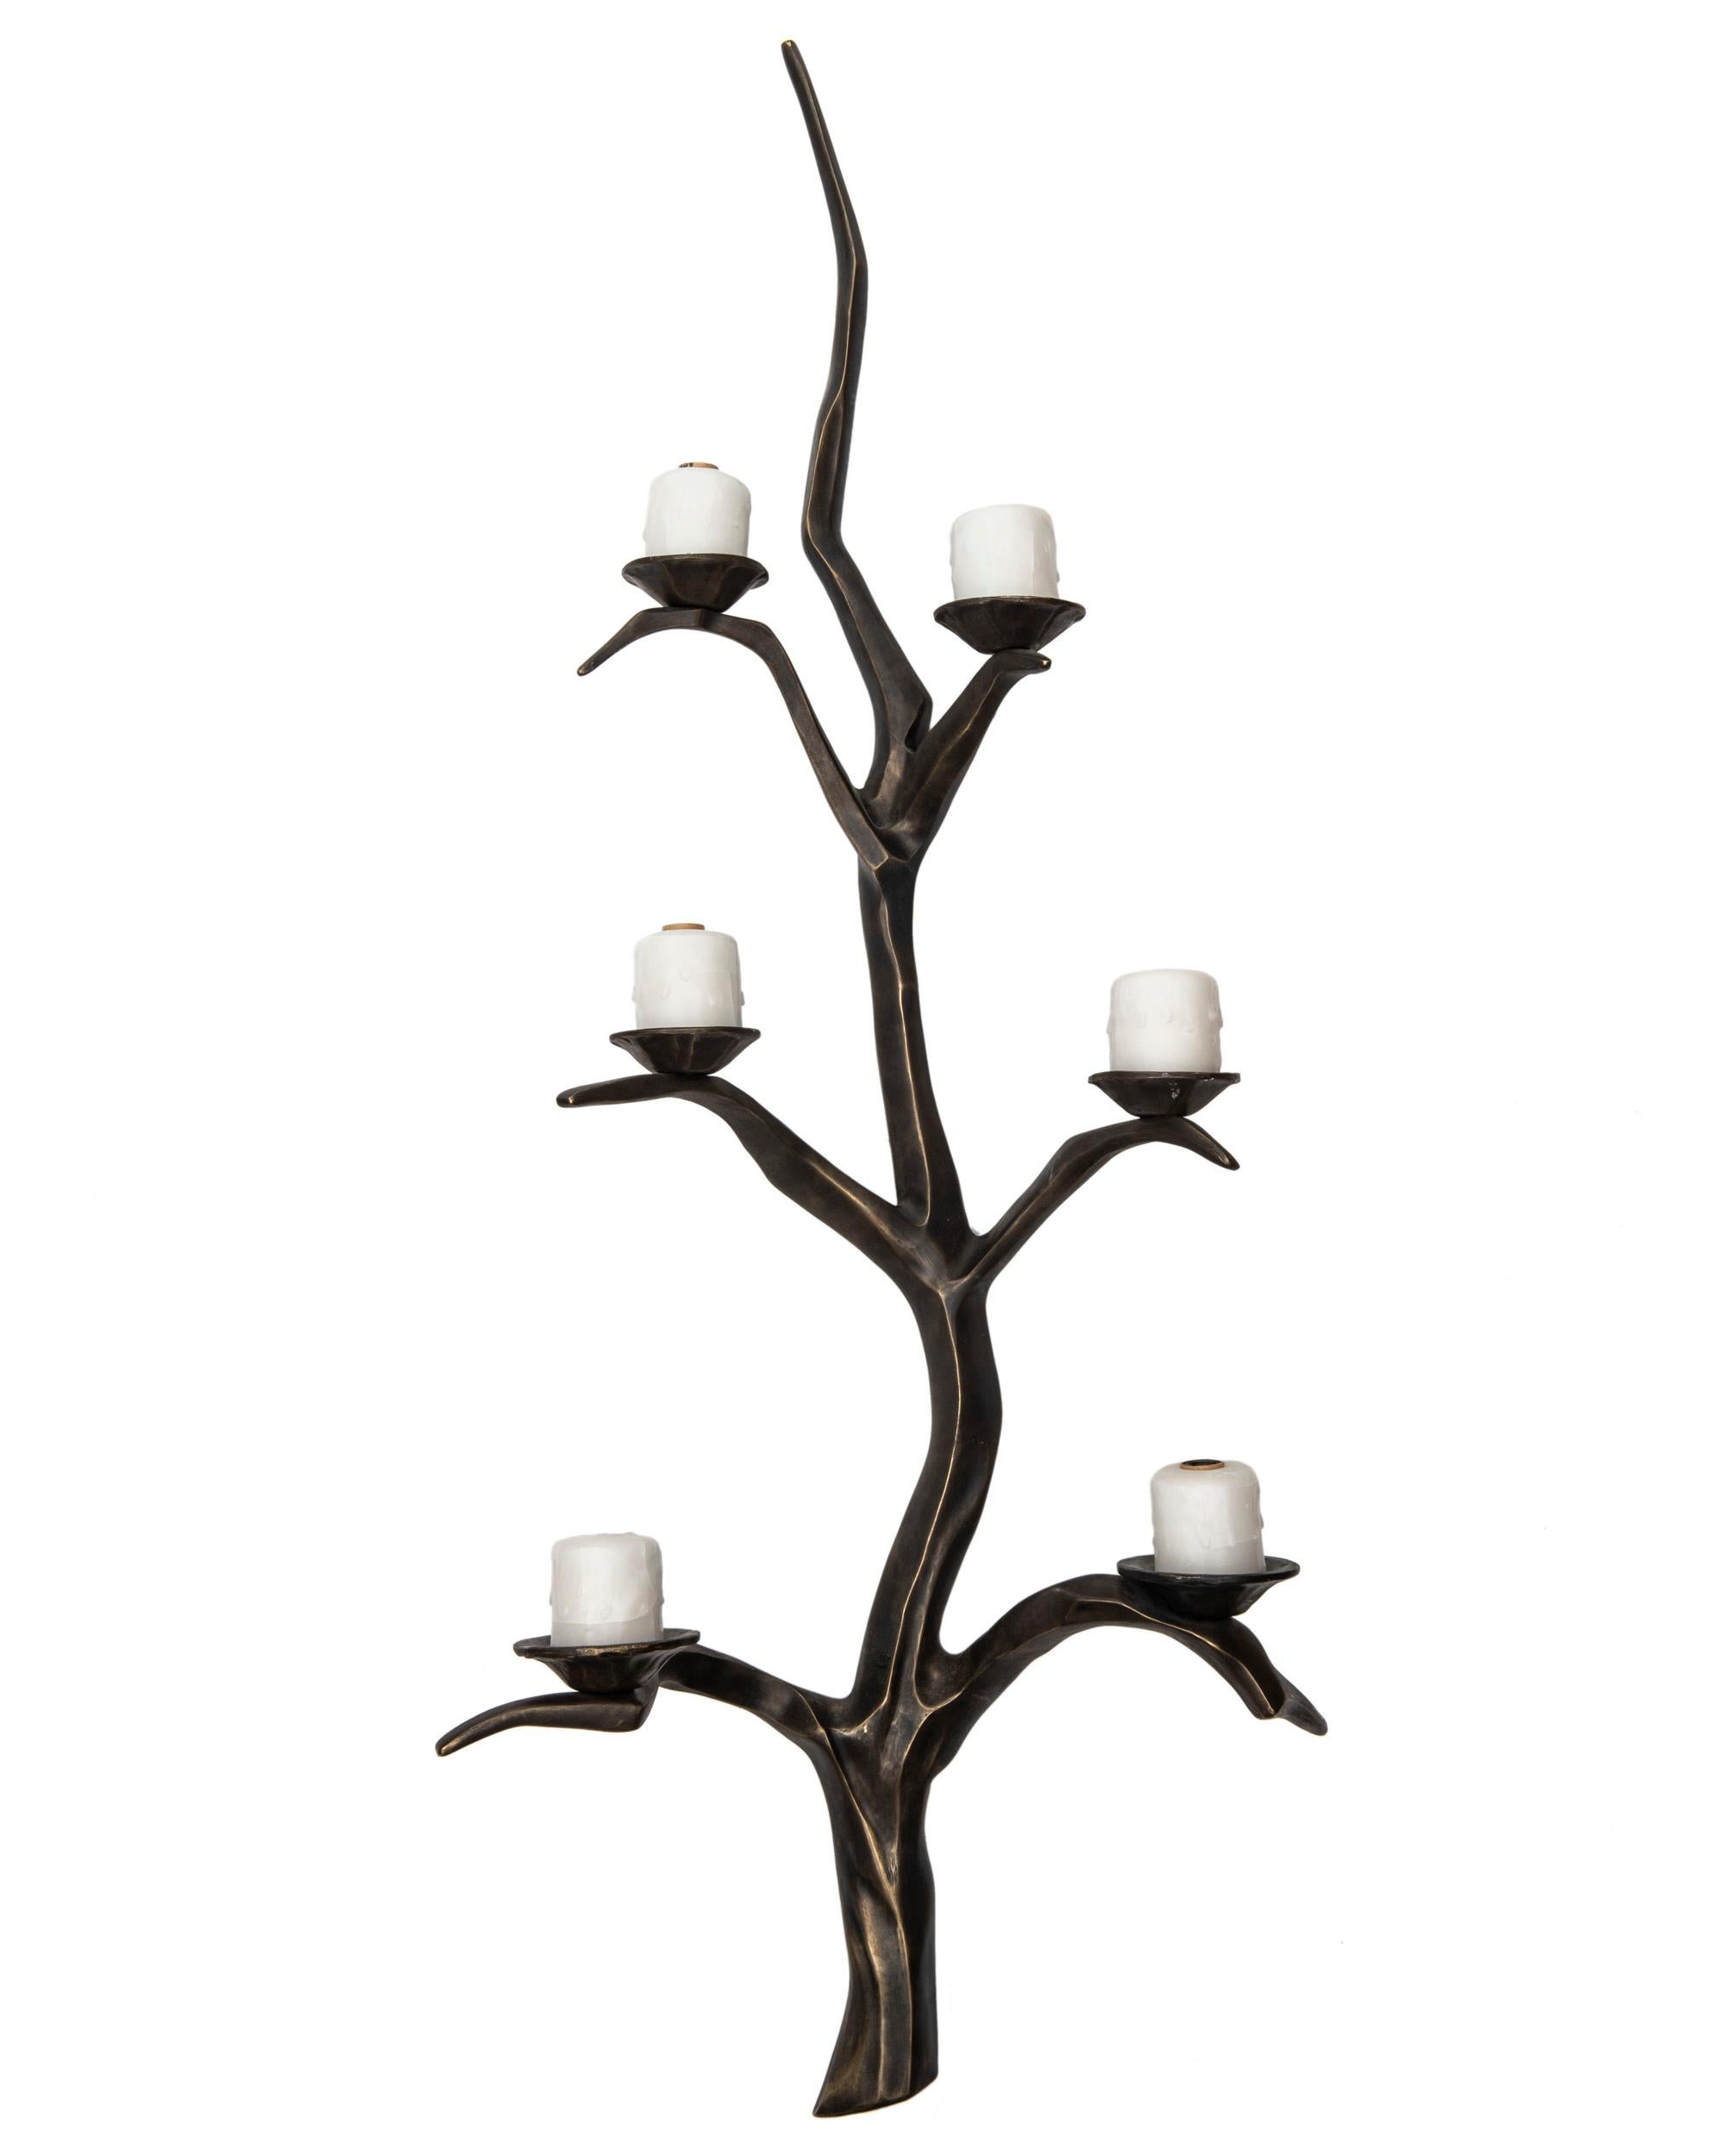 These are an amazing pair of six-light solid bronze wall sconces in a rich dark brown color with
hints of brass showing on the edges. The sconces are illuminated and decorated in a wax finish.